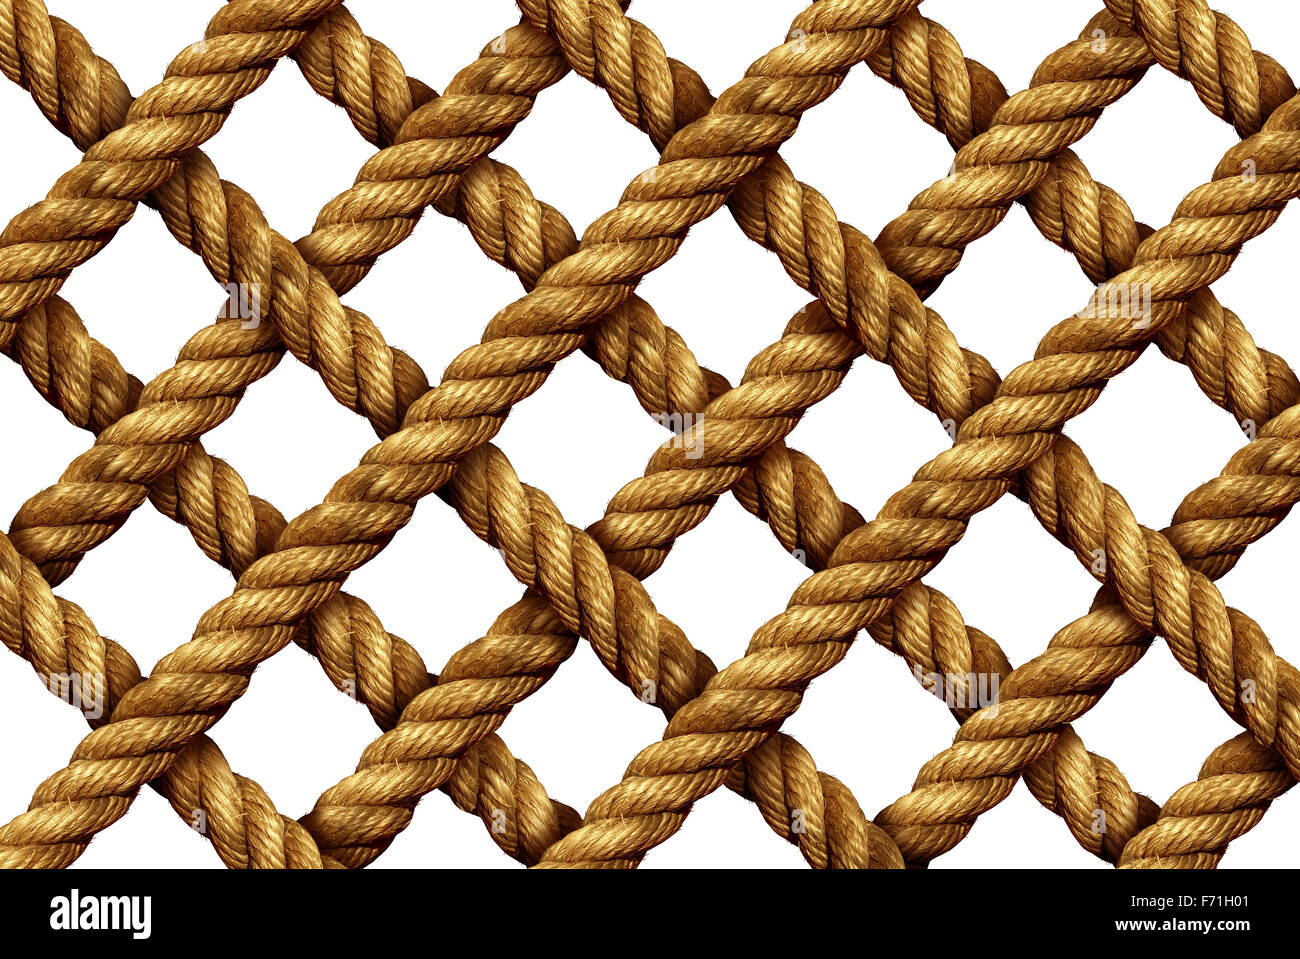 Rope grid pattern as a group of strong thick nautical cords connected in a geometric shape as a marine net isolated on a white background. Stock Photo